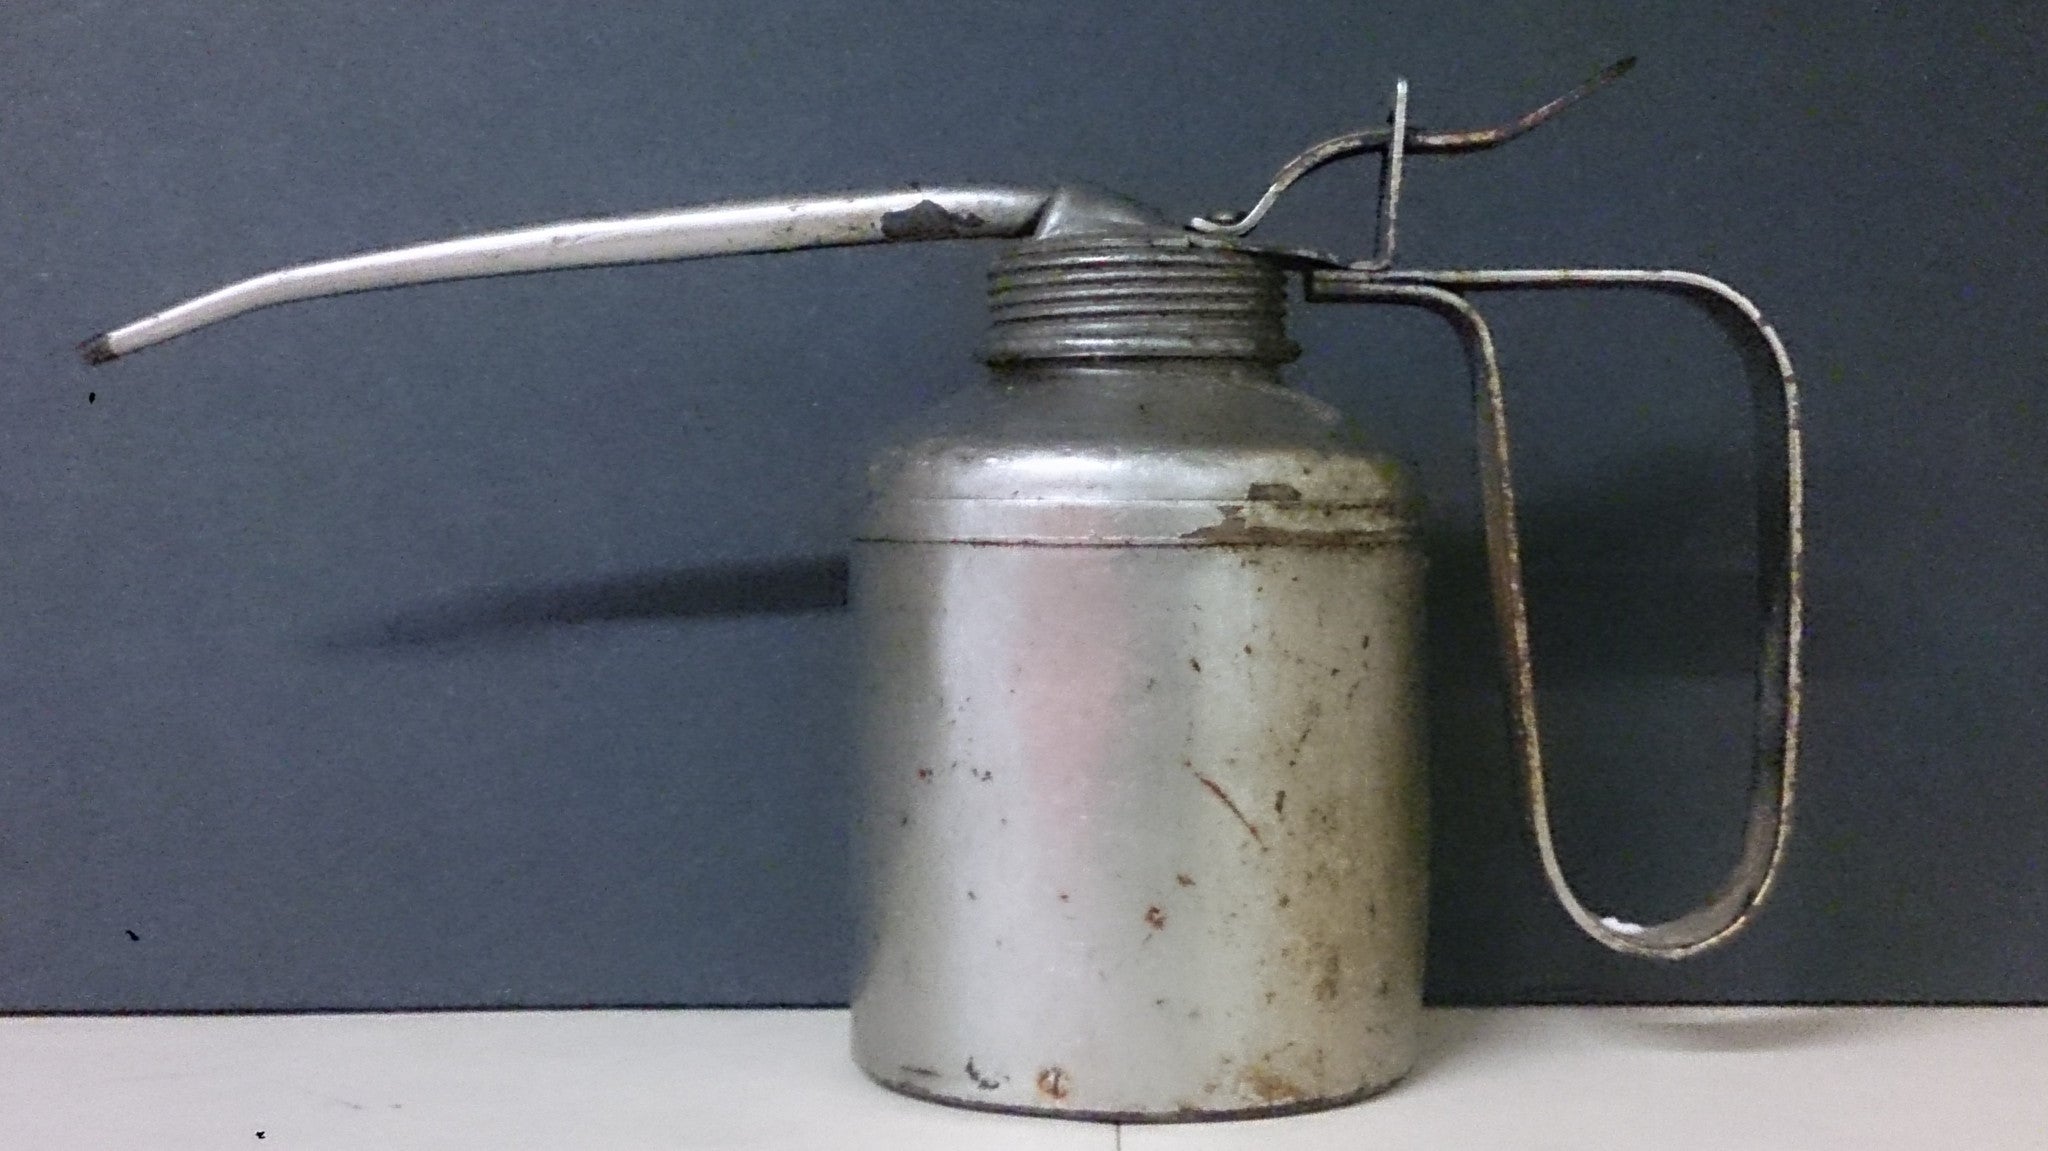 Plews Gem Oil Can, Made In Minneapolis U.S.A, 1920s. – Roadshow Collectibles